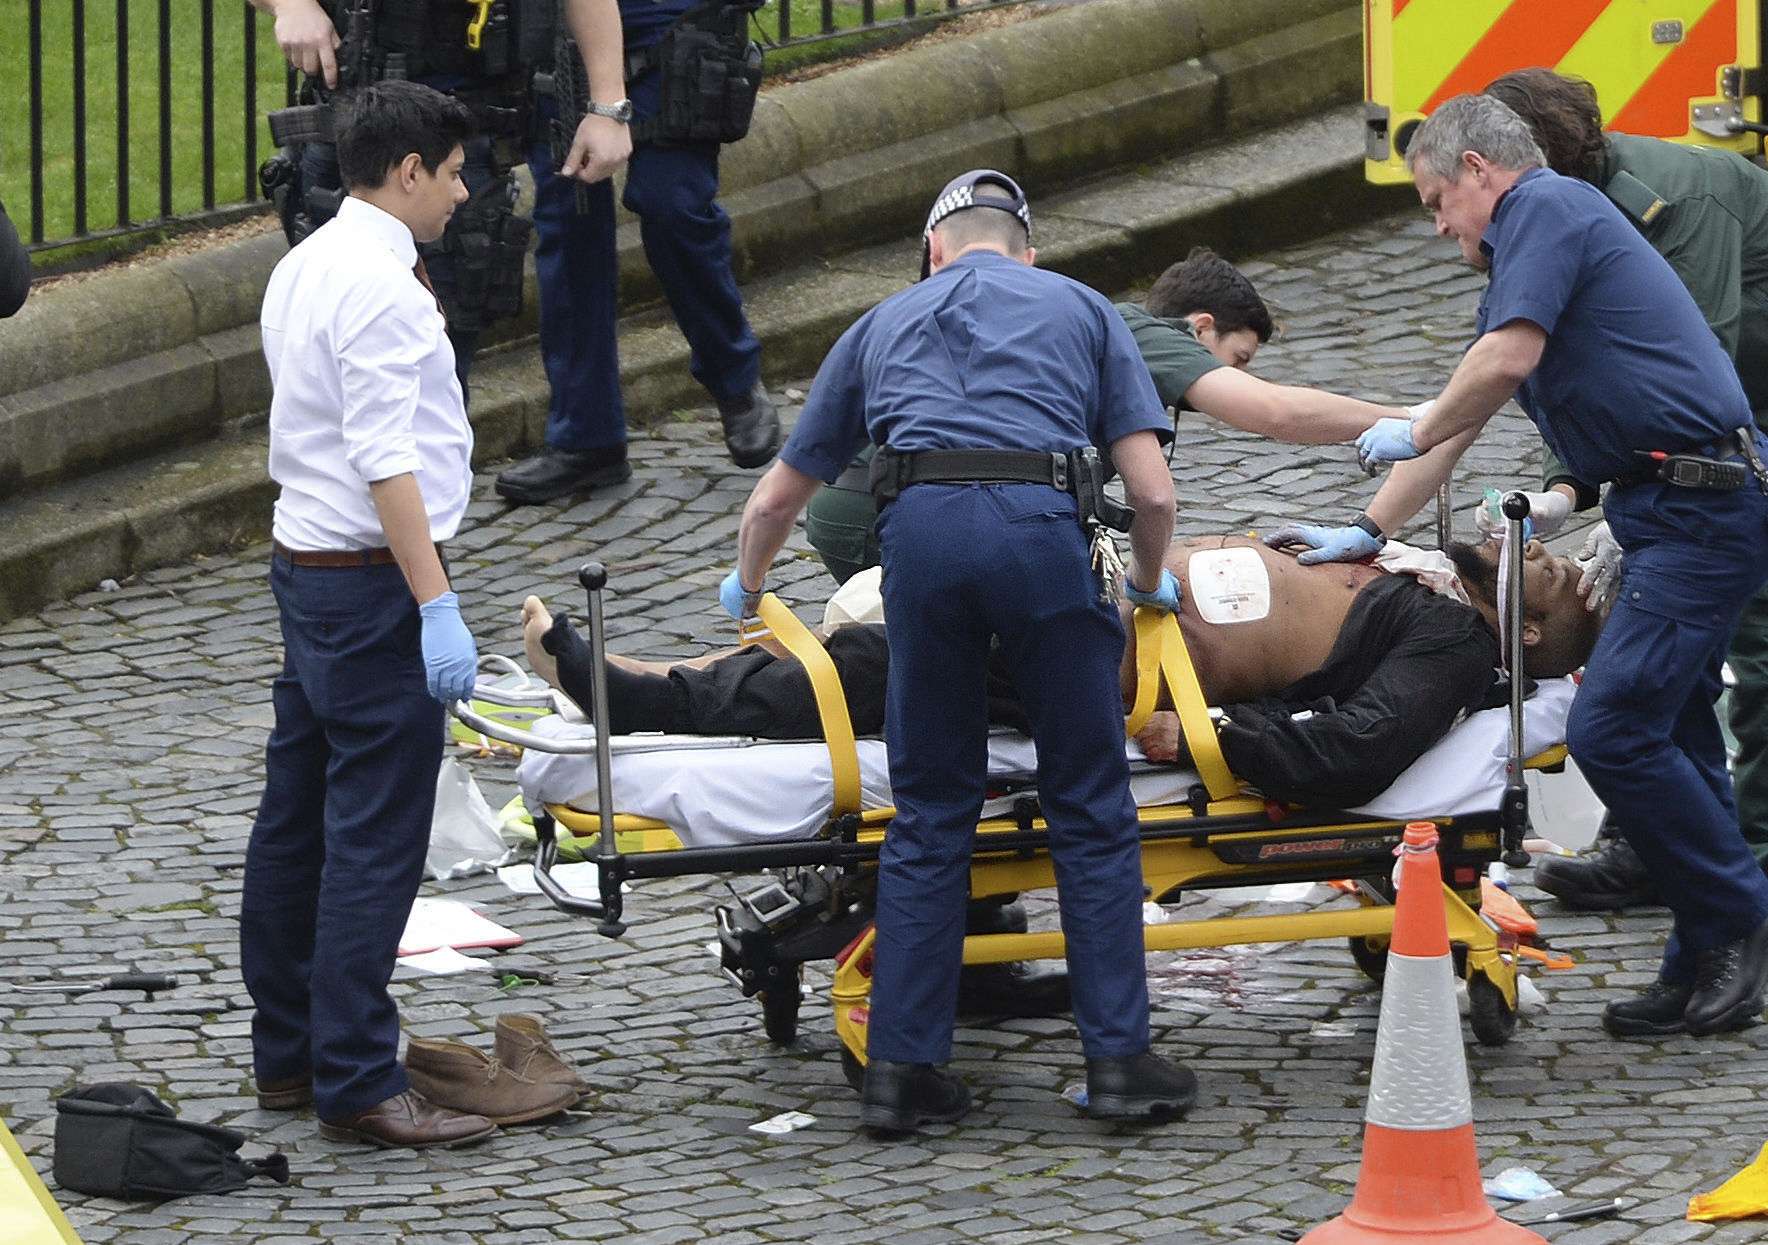 Press Association news agency photos believed to be of the knifeman lying on an ambulance stretcher showed a burly man with black clothes and a beard. Photo: PA